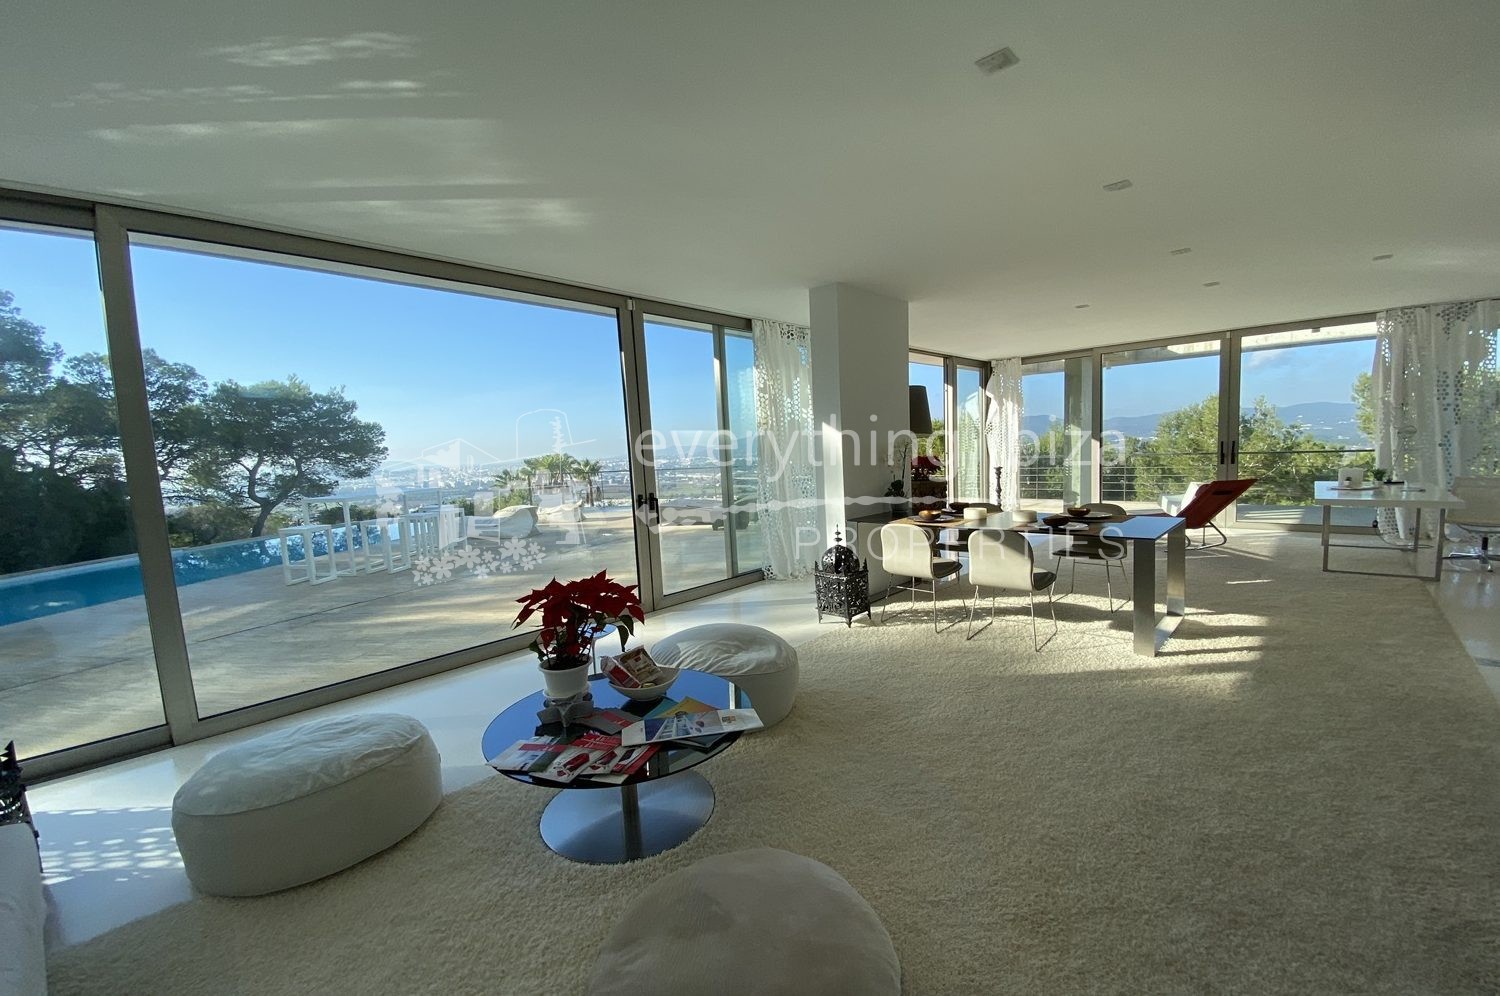 Modern villa with stunning views, ref. 1290, for sale in Ibiza by everything ibiza Properties